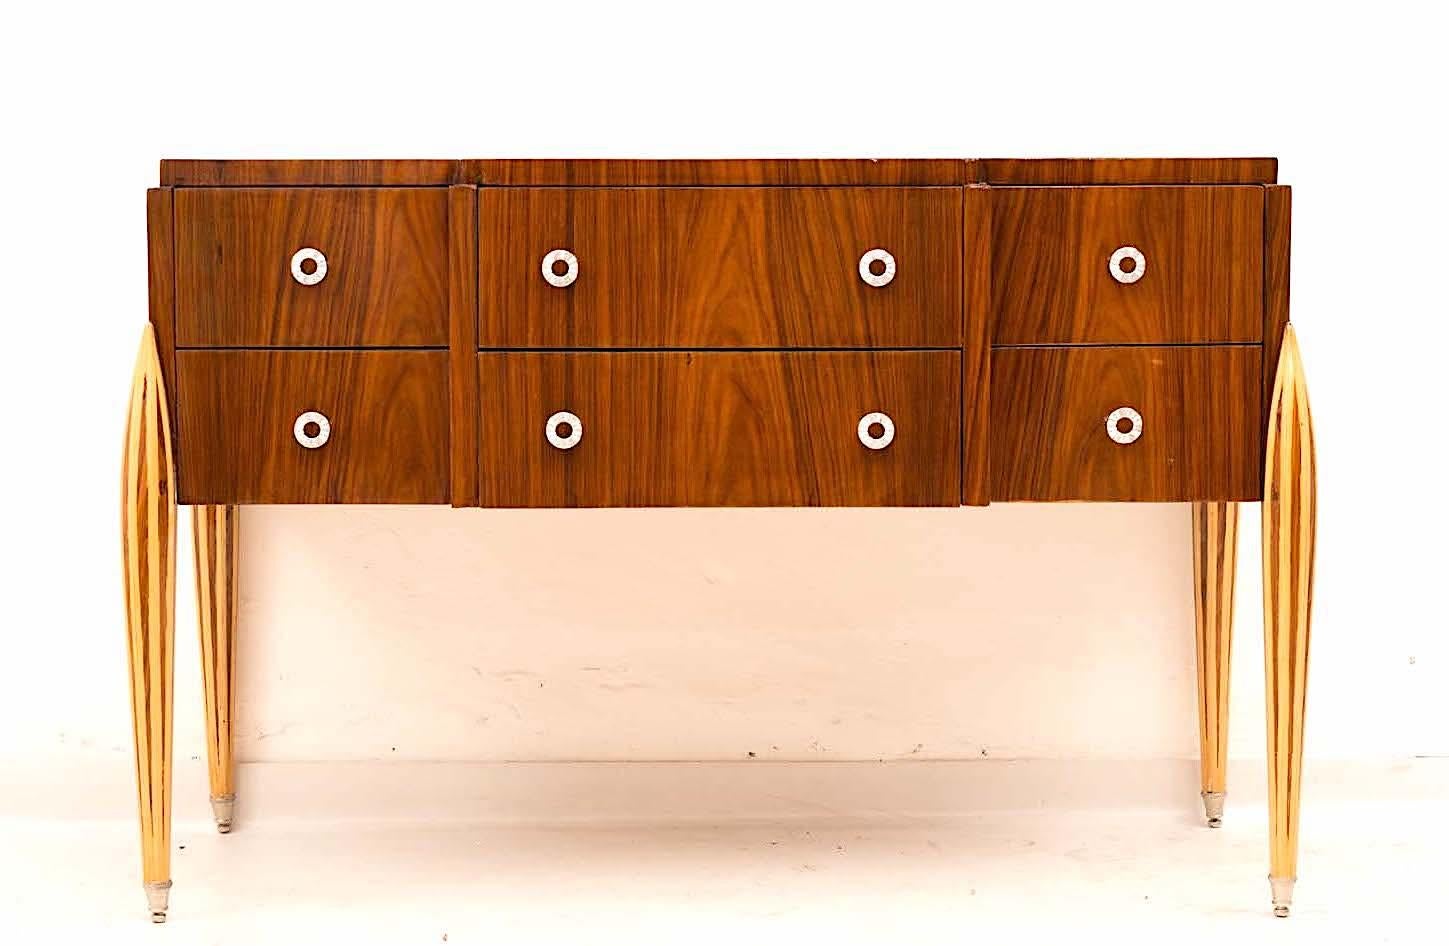 Art Deco dresser with six drawers and hammered brass hardware, inlaid fluted legs. This commode an elegant look offer ample storage space, is in perfect vintage condition.